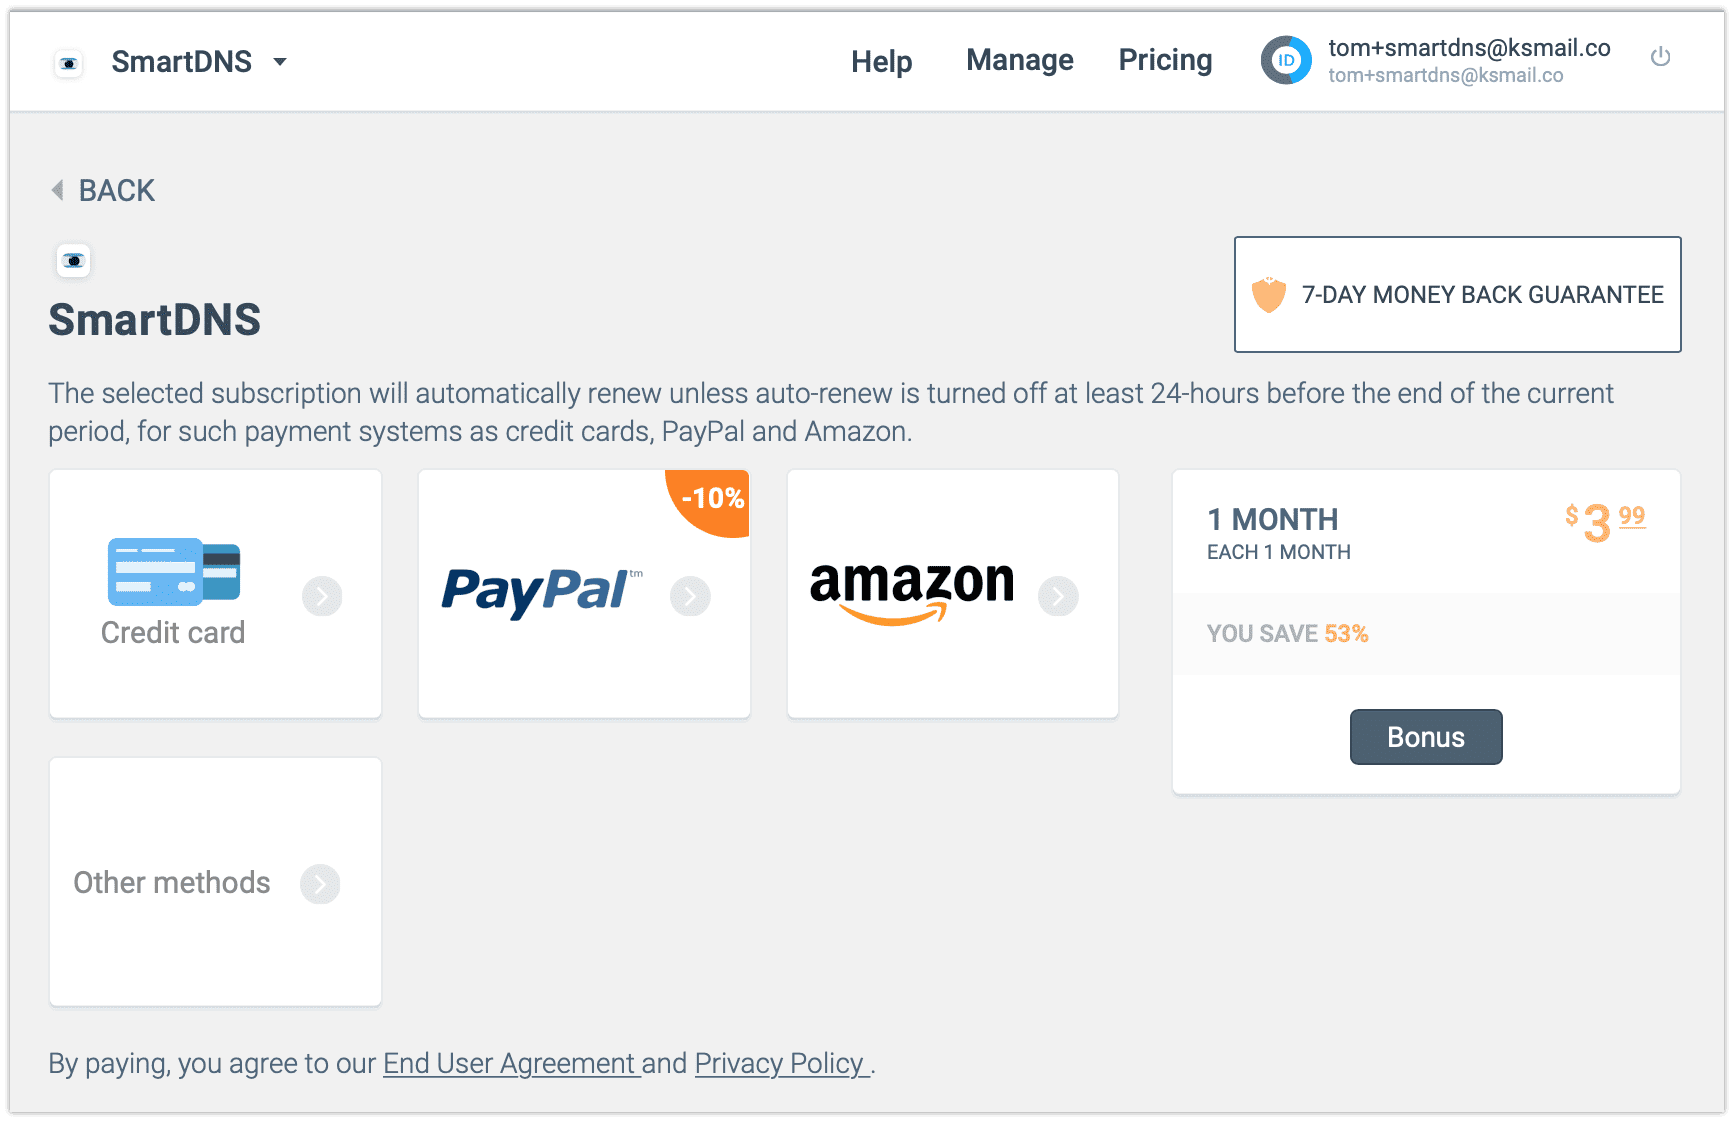 Select a payment method